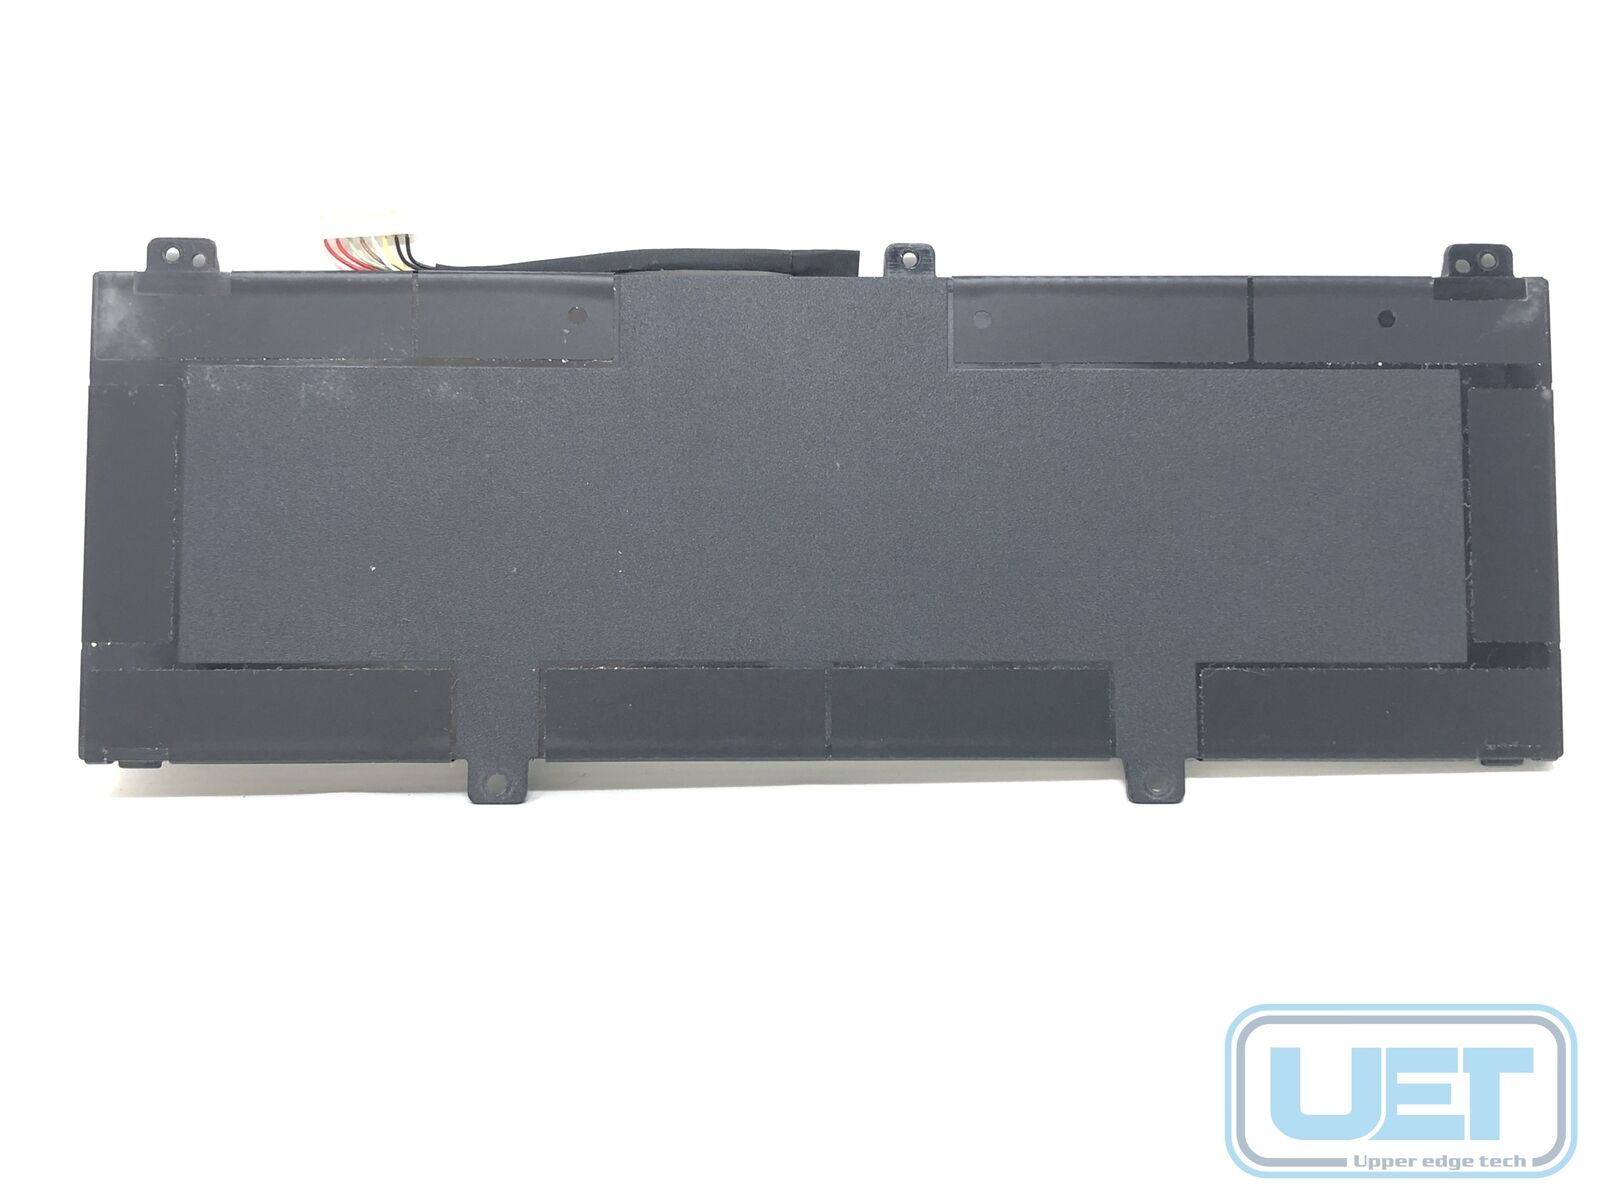 Asus Chromebook C213SA Genuine Battery 0B200-02440100 2Cell 46Whr Grade B Tested